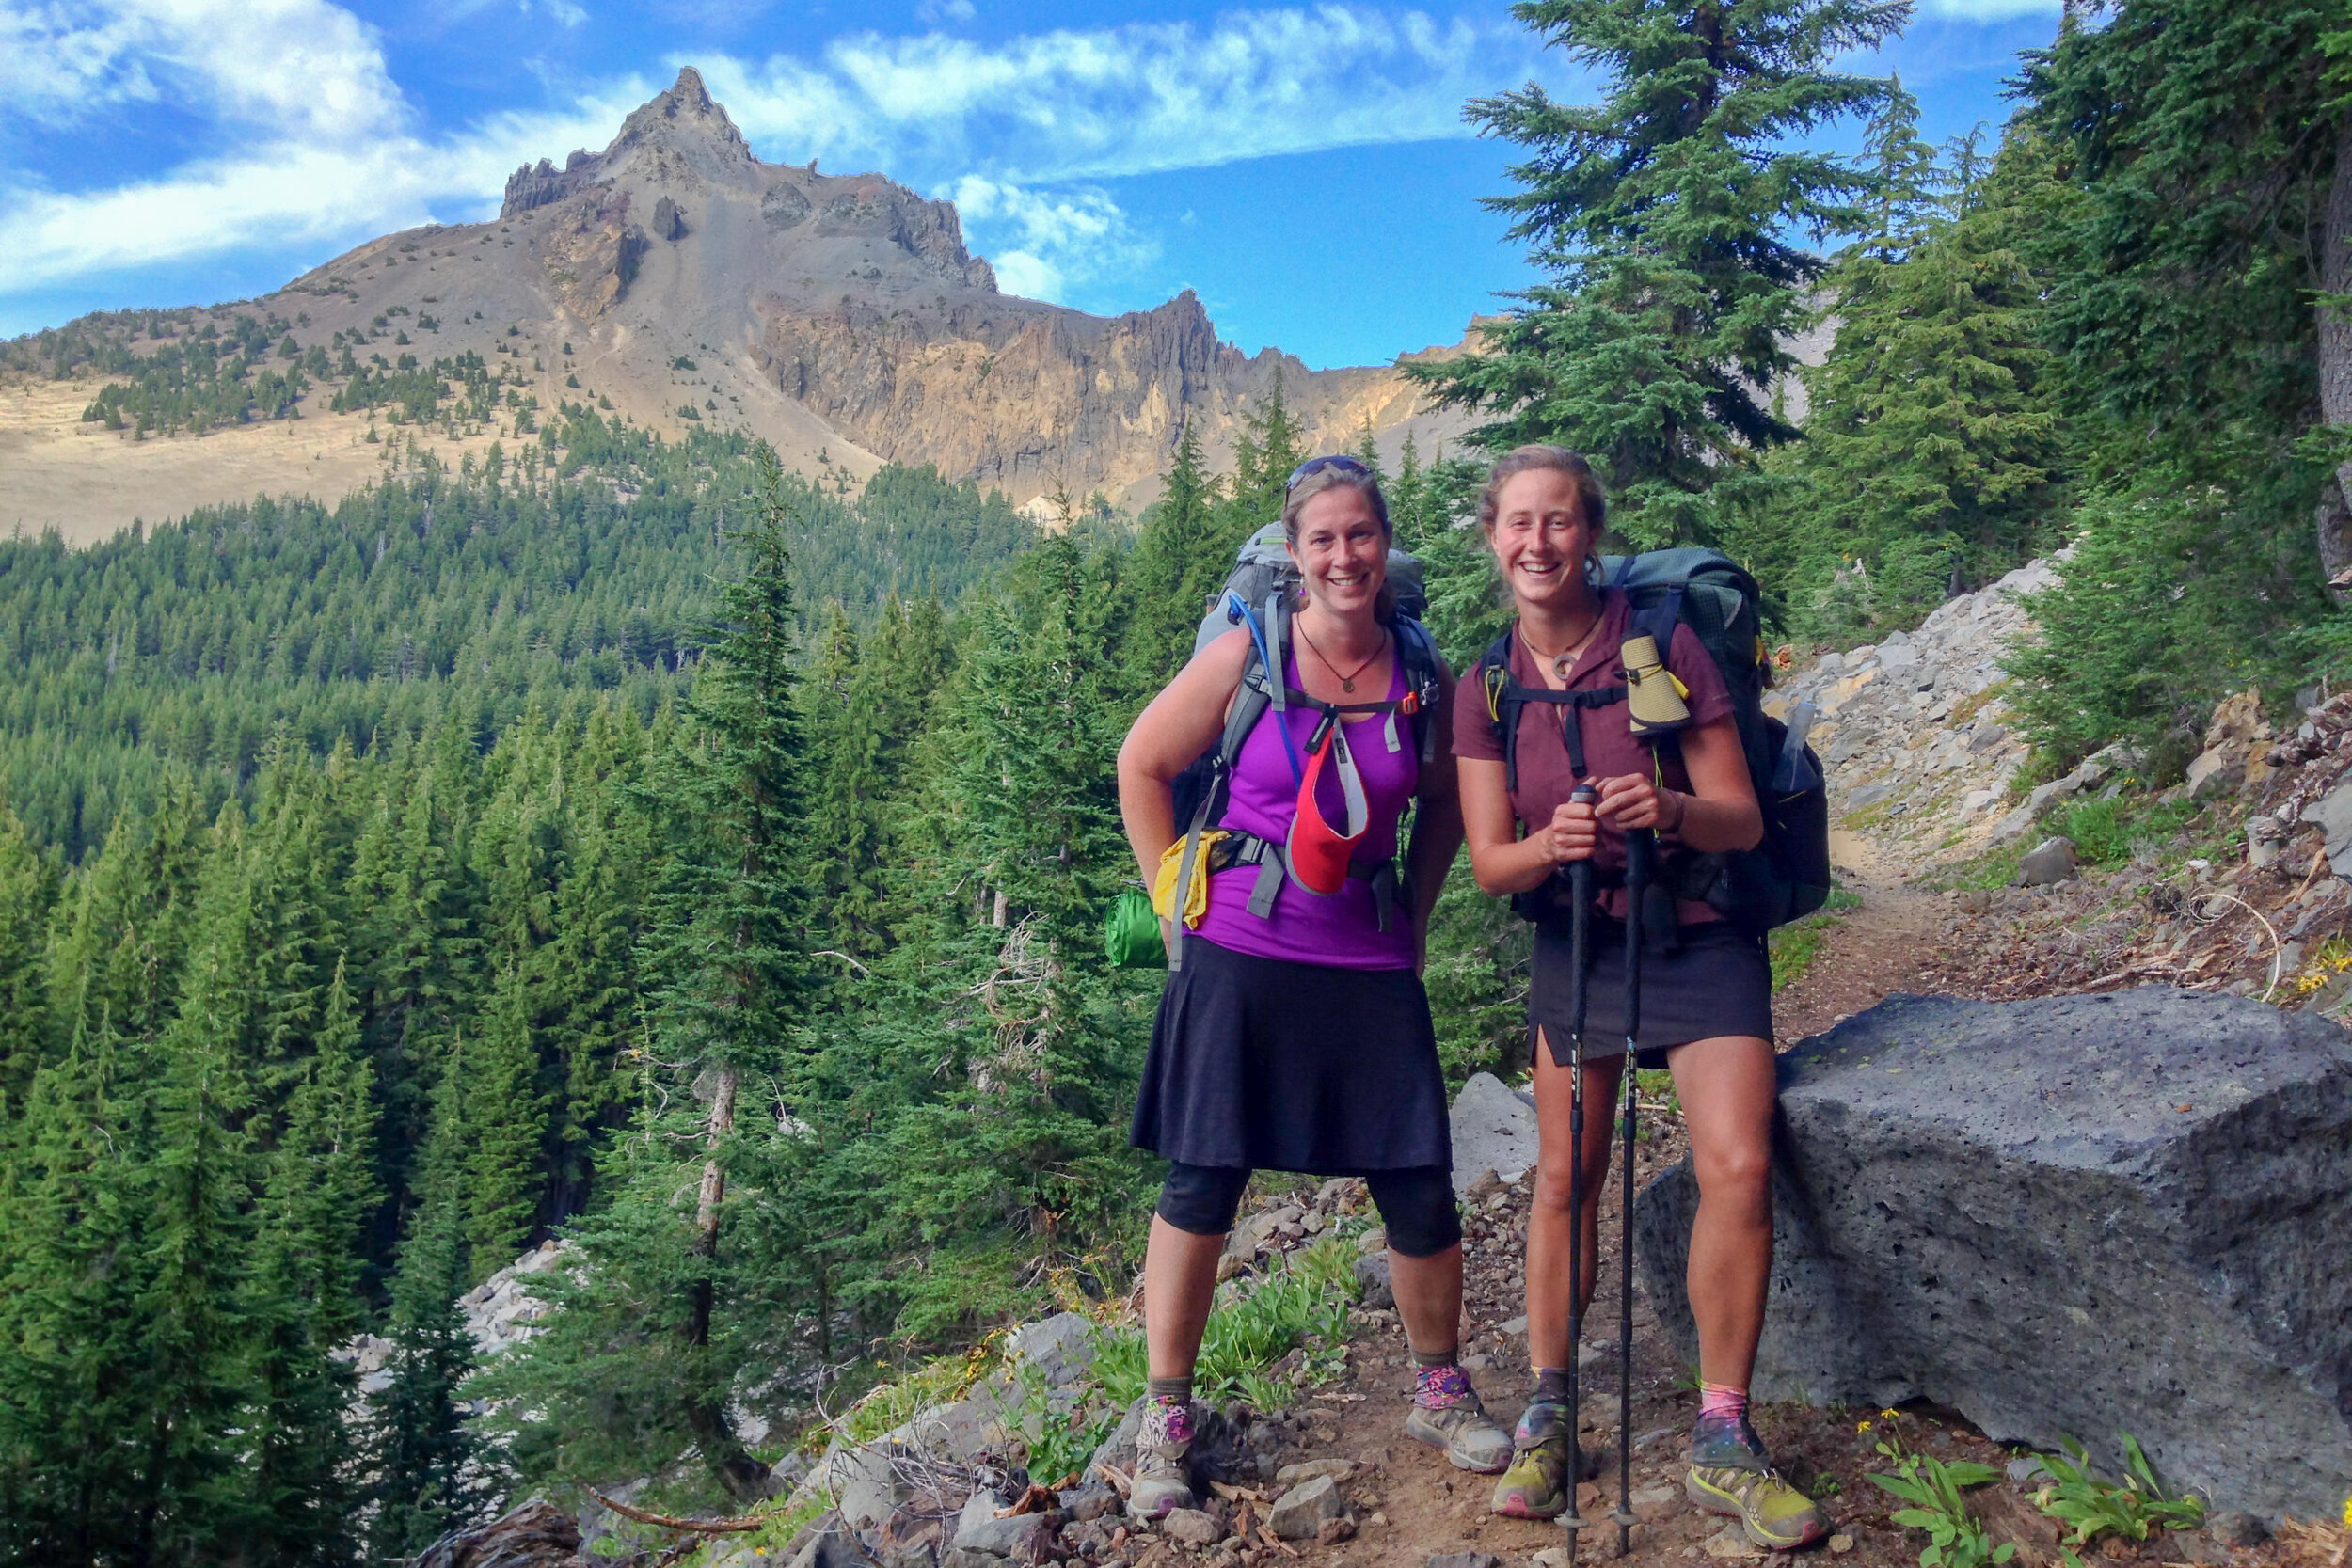 hiking the pct near mt. thielsen in the oregon high cascades